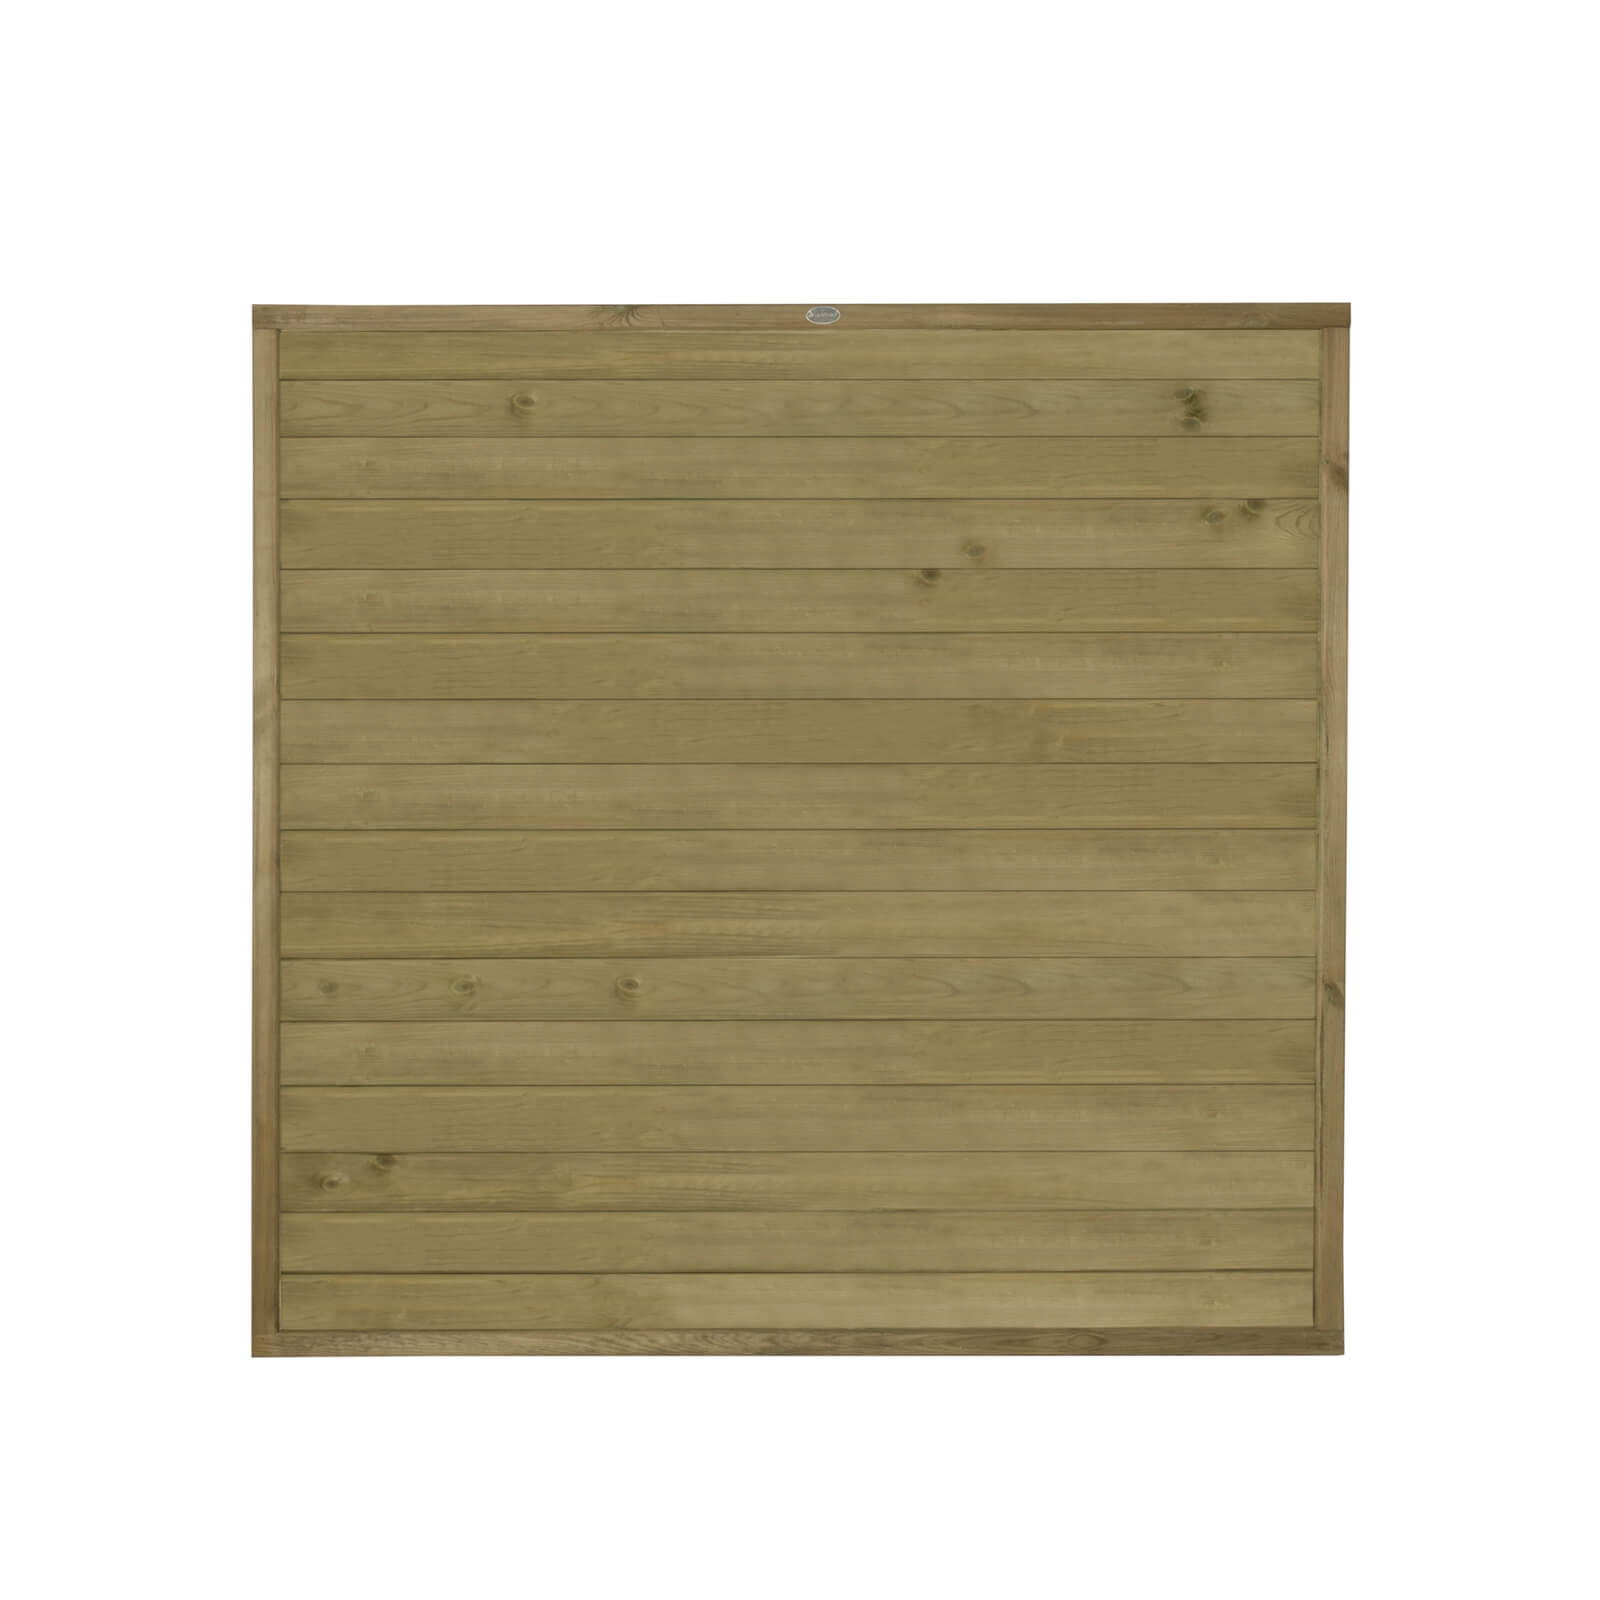 Horizontal Tongue & Groove Fence Panel - 6ft - Pack of 3